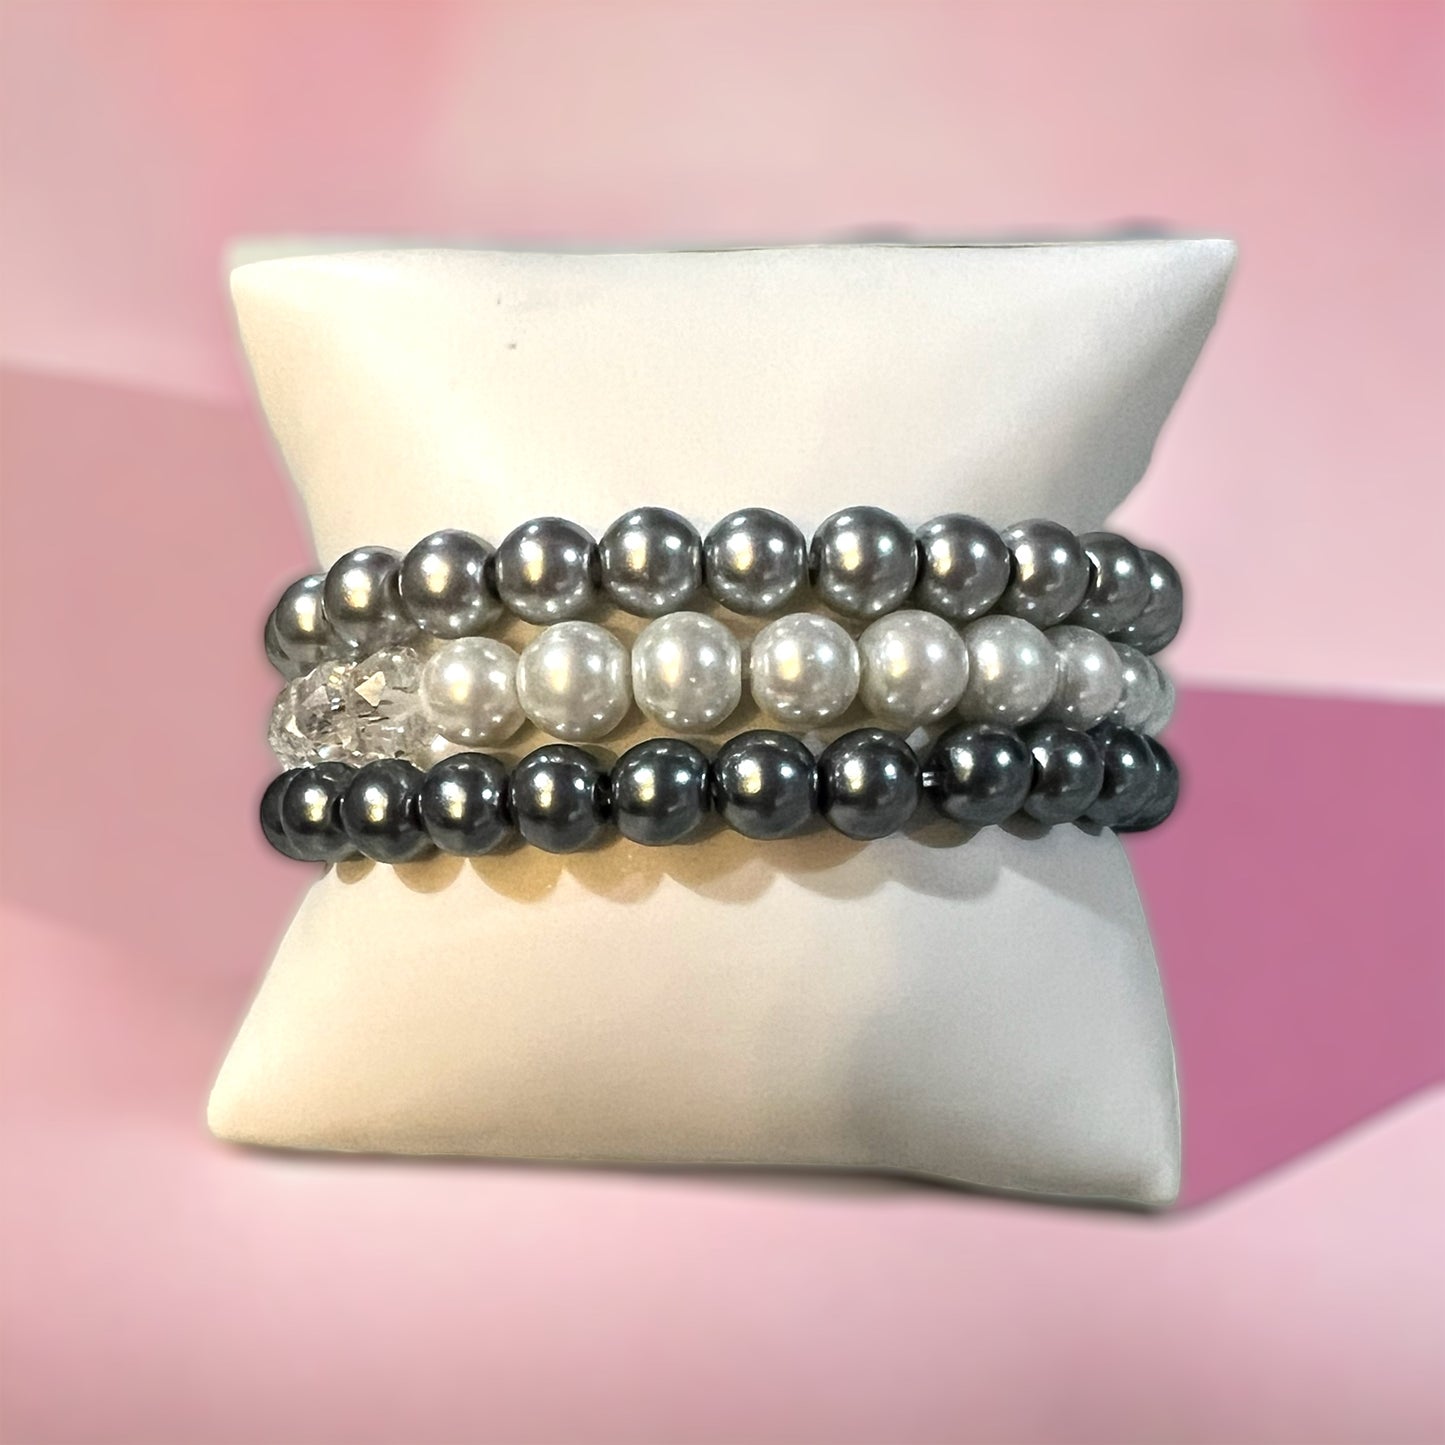 Shades of Gray Pearl Bracelet Stack